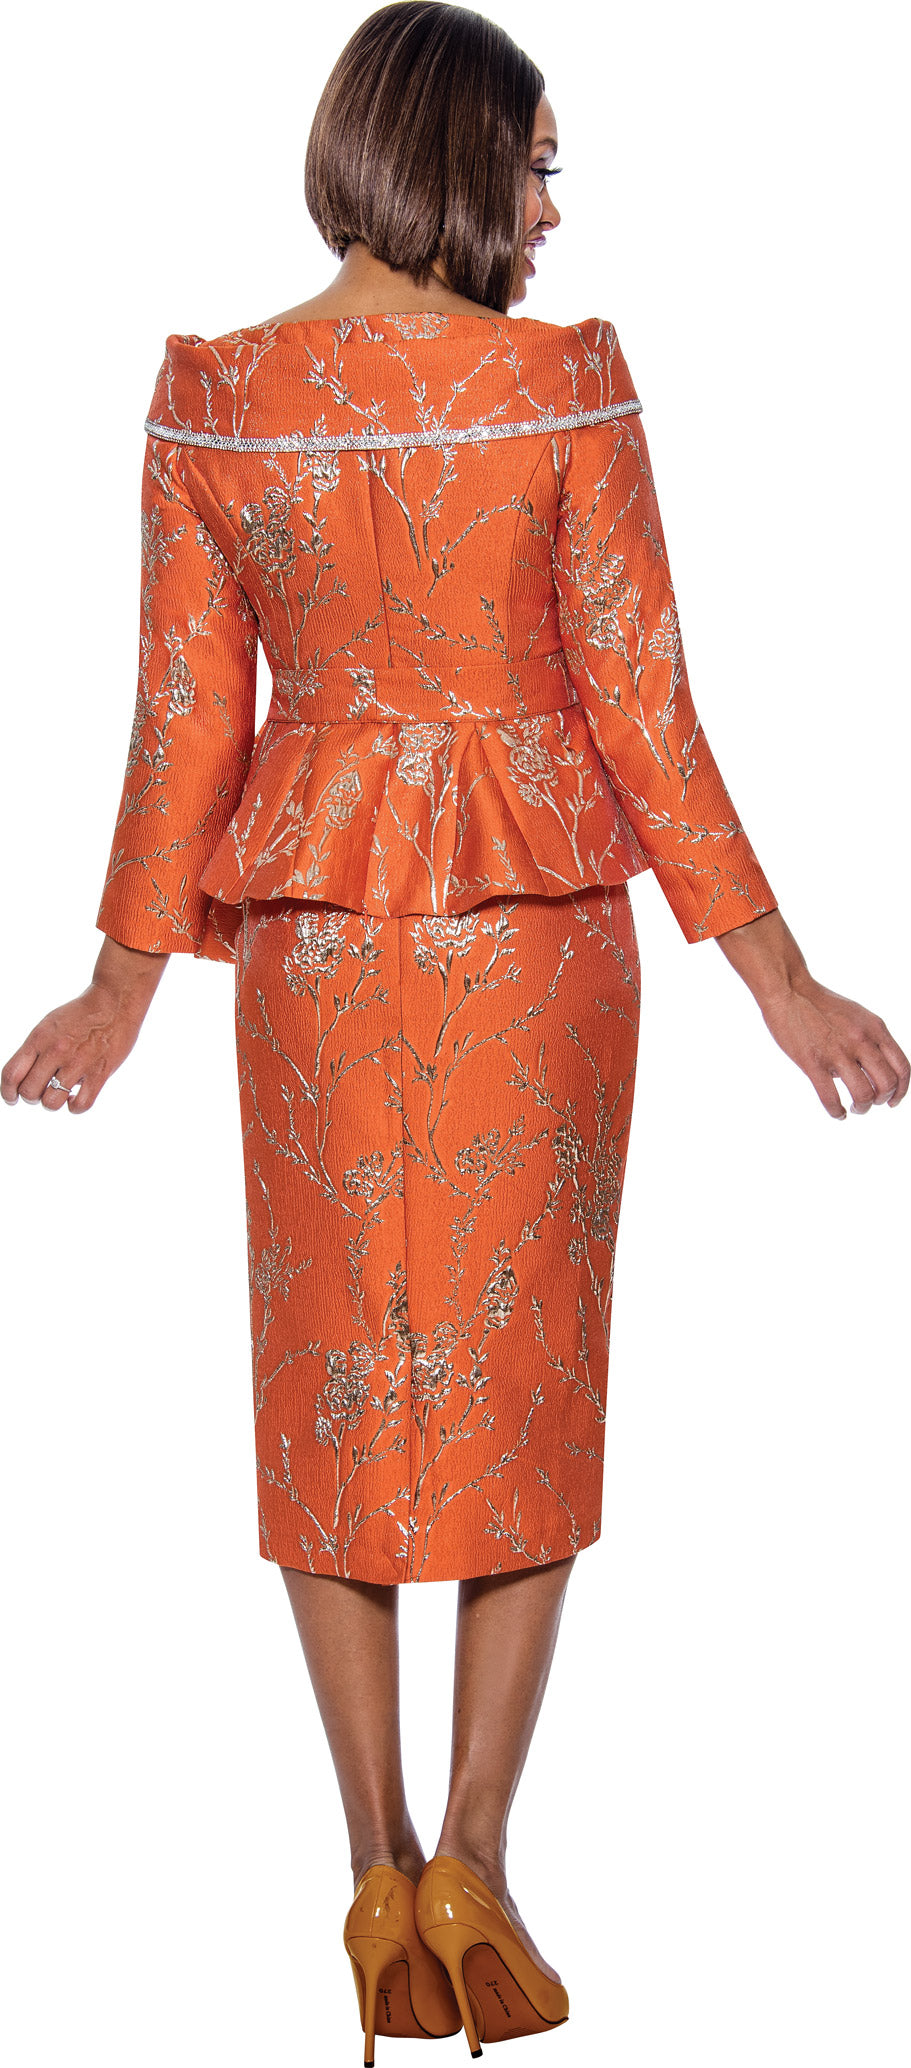 Divine Queen - DQ2062 - 2PC Novelty Fabric Skirt Suit with Portrait Collar